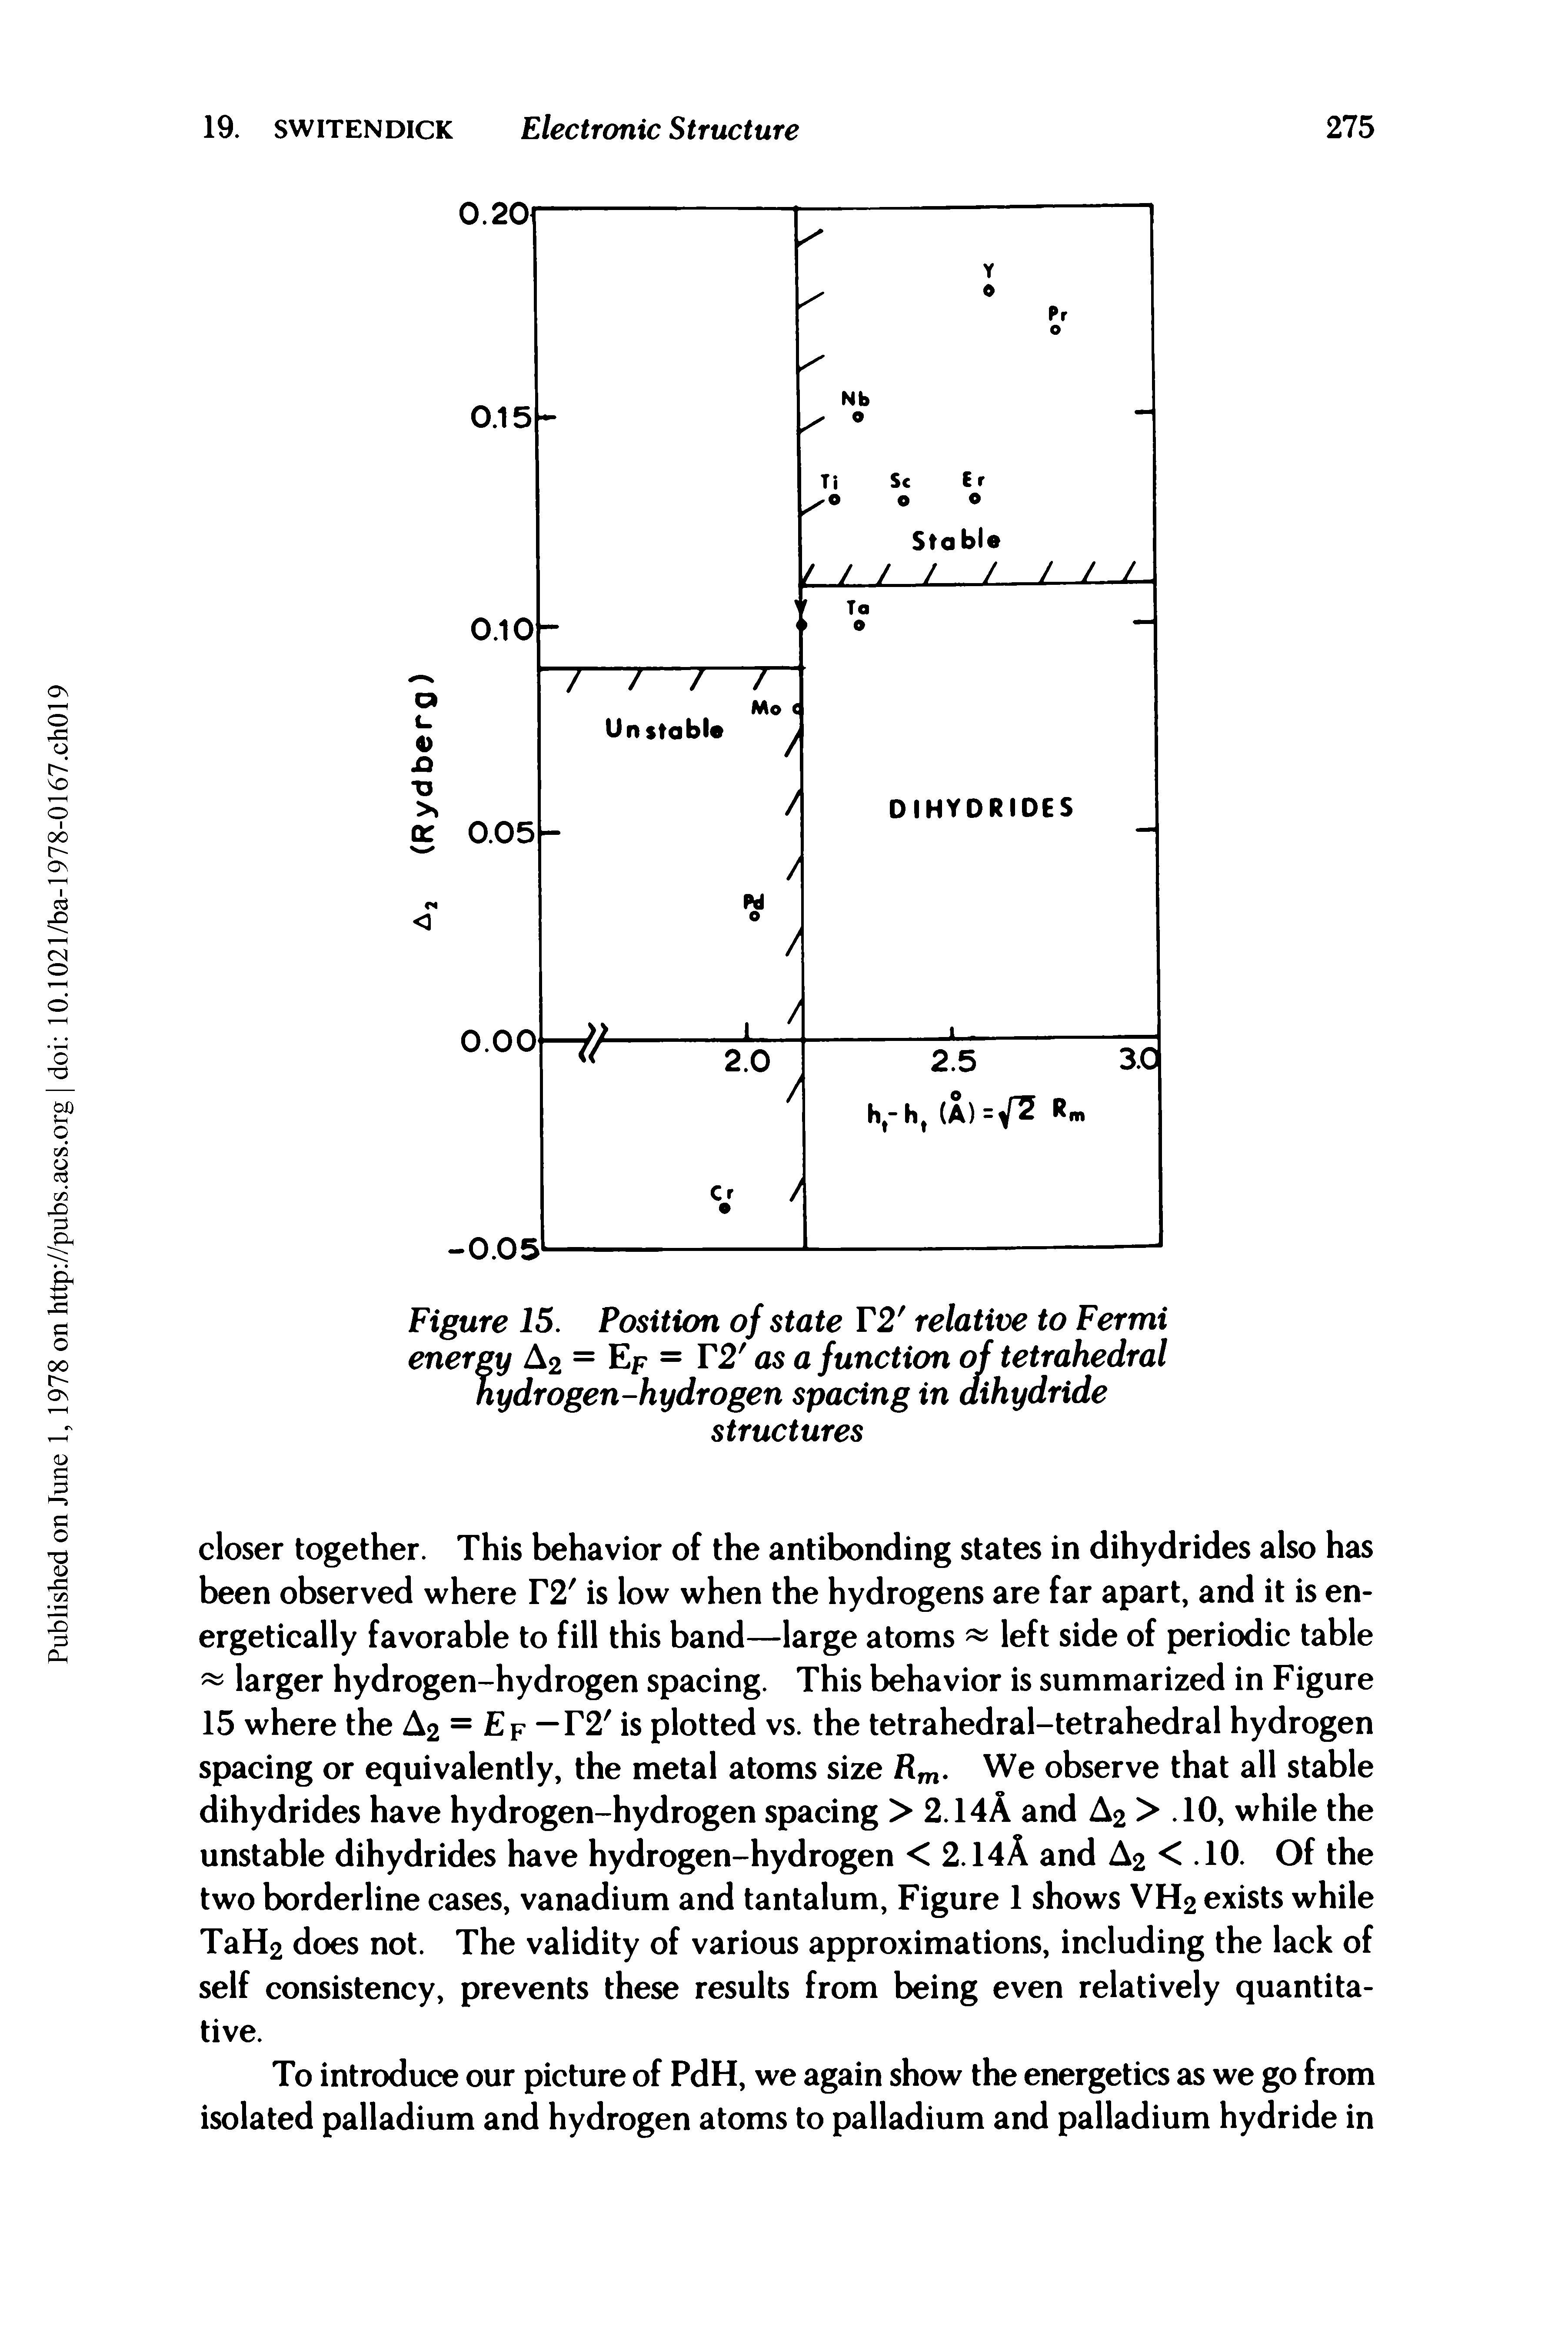 Figure 15. Position of state T2f relative to Fermi energy A2 = Ep = T2f as a function of tetrahedral hydrogen-hydrogen spacing in dihydride structures...